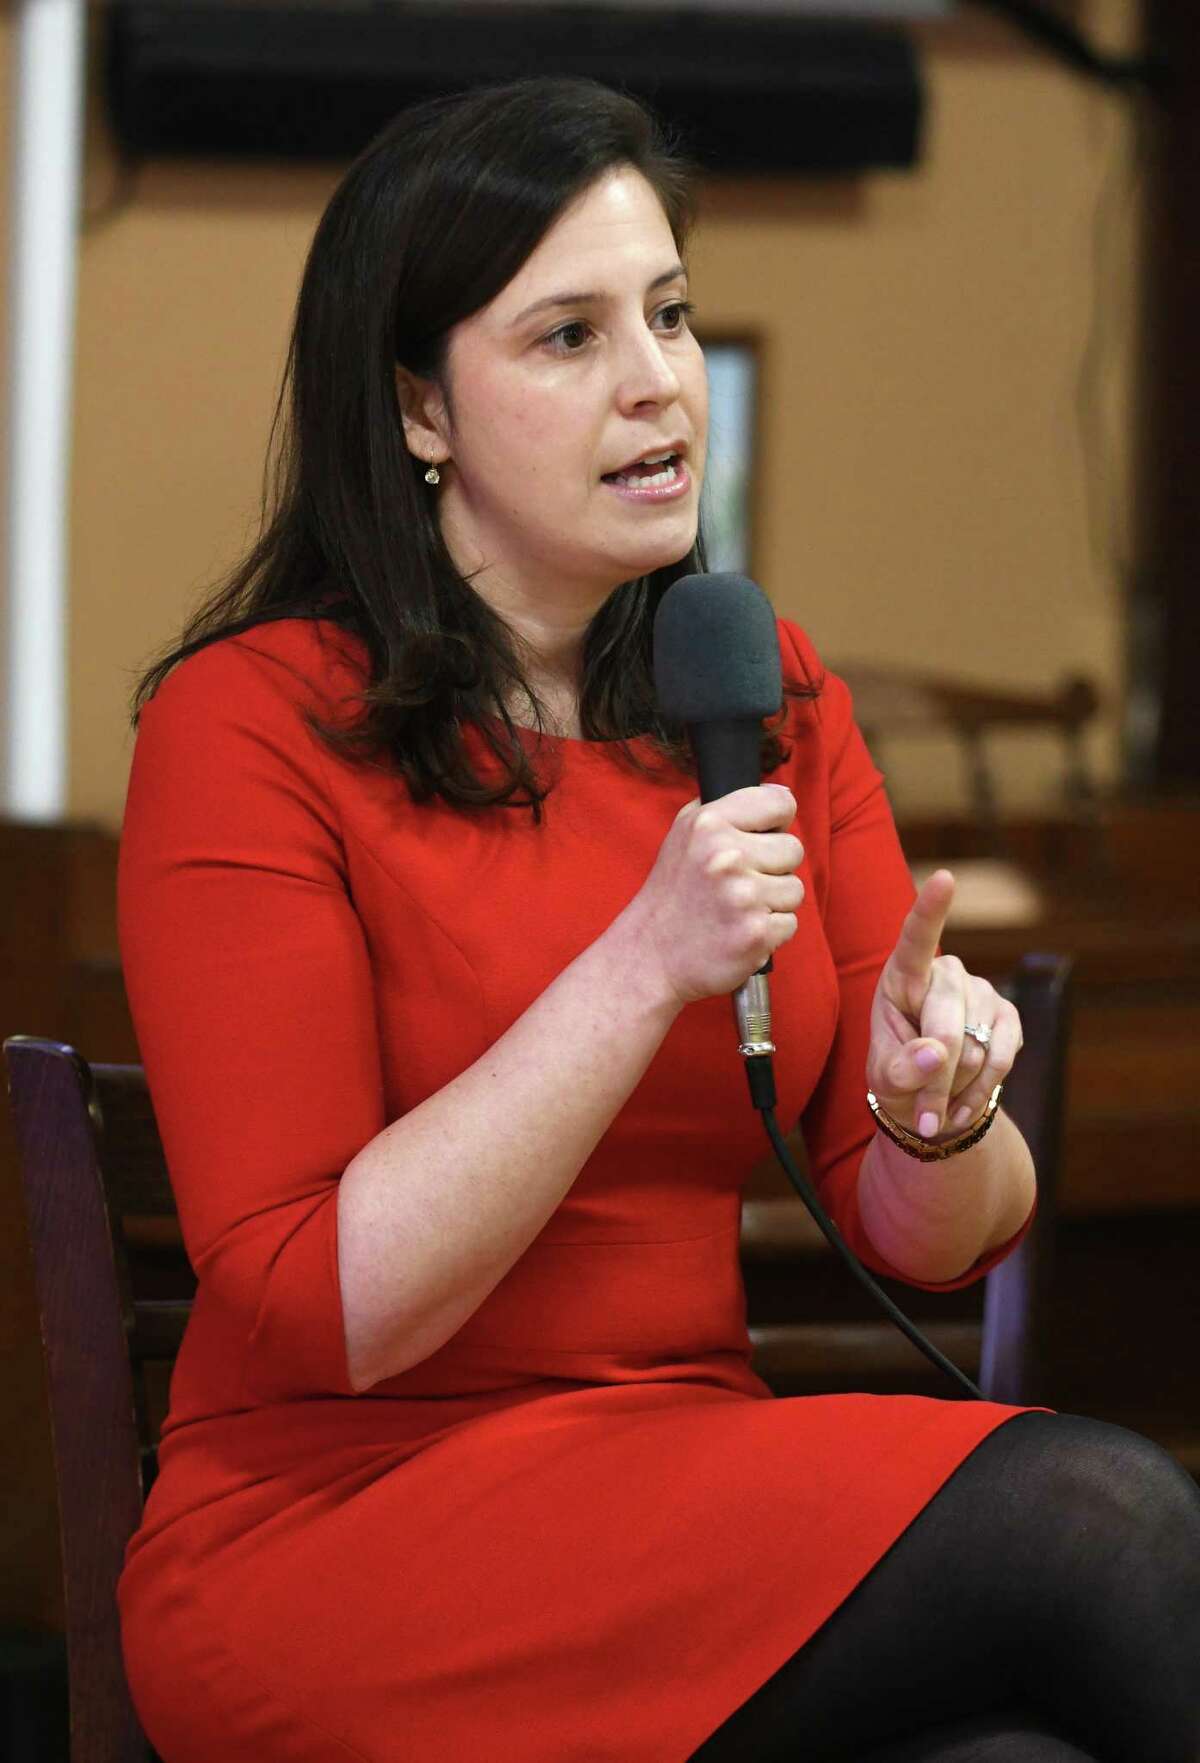 Congresswoman Elise Stefanik meets with constituents in a town-hall style event held at Moreau Community Center on Thursday, April 5, 2018 in South Glens Falls, N.Y. (Lori Van Buren/Times Union)